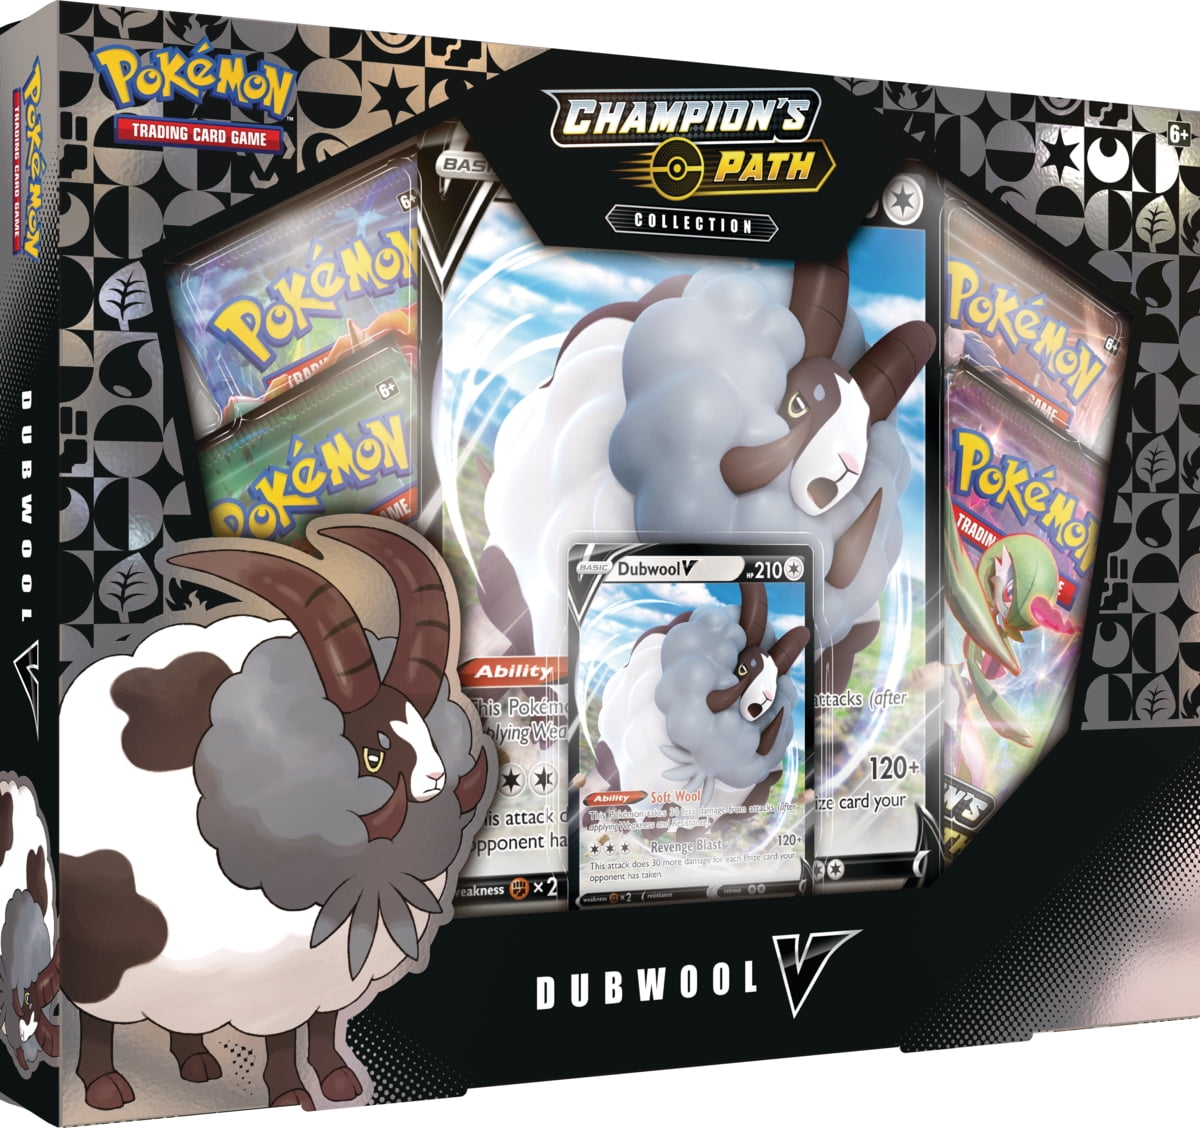 Details about   POKEMON TCG CHAMPION'S PATH COLLECTION DUBWOOL V BOX 